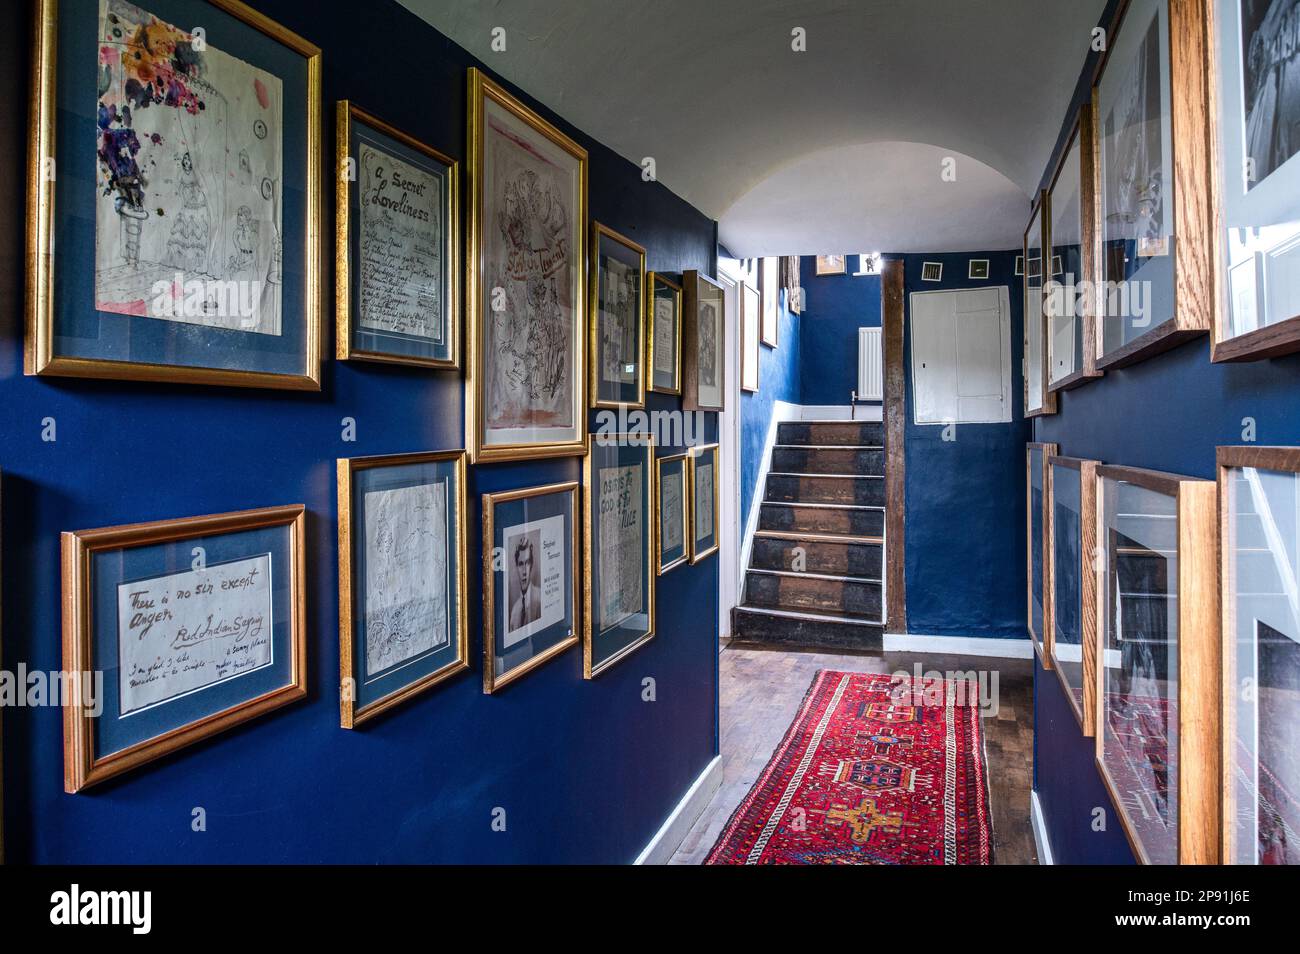 Oxford blue walls in hallway with photographs by Cecil Beaton and drawings by Stephen Tennant in 16th century Tudor farmhouse, Suffolk, UK Stock Photo